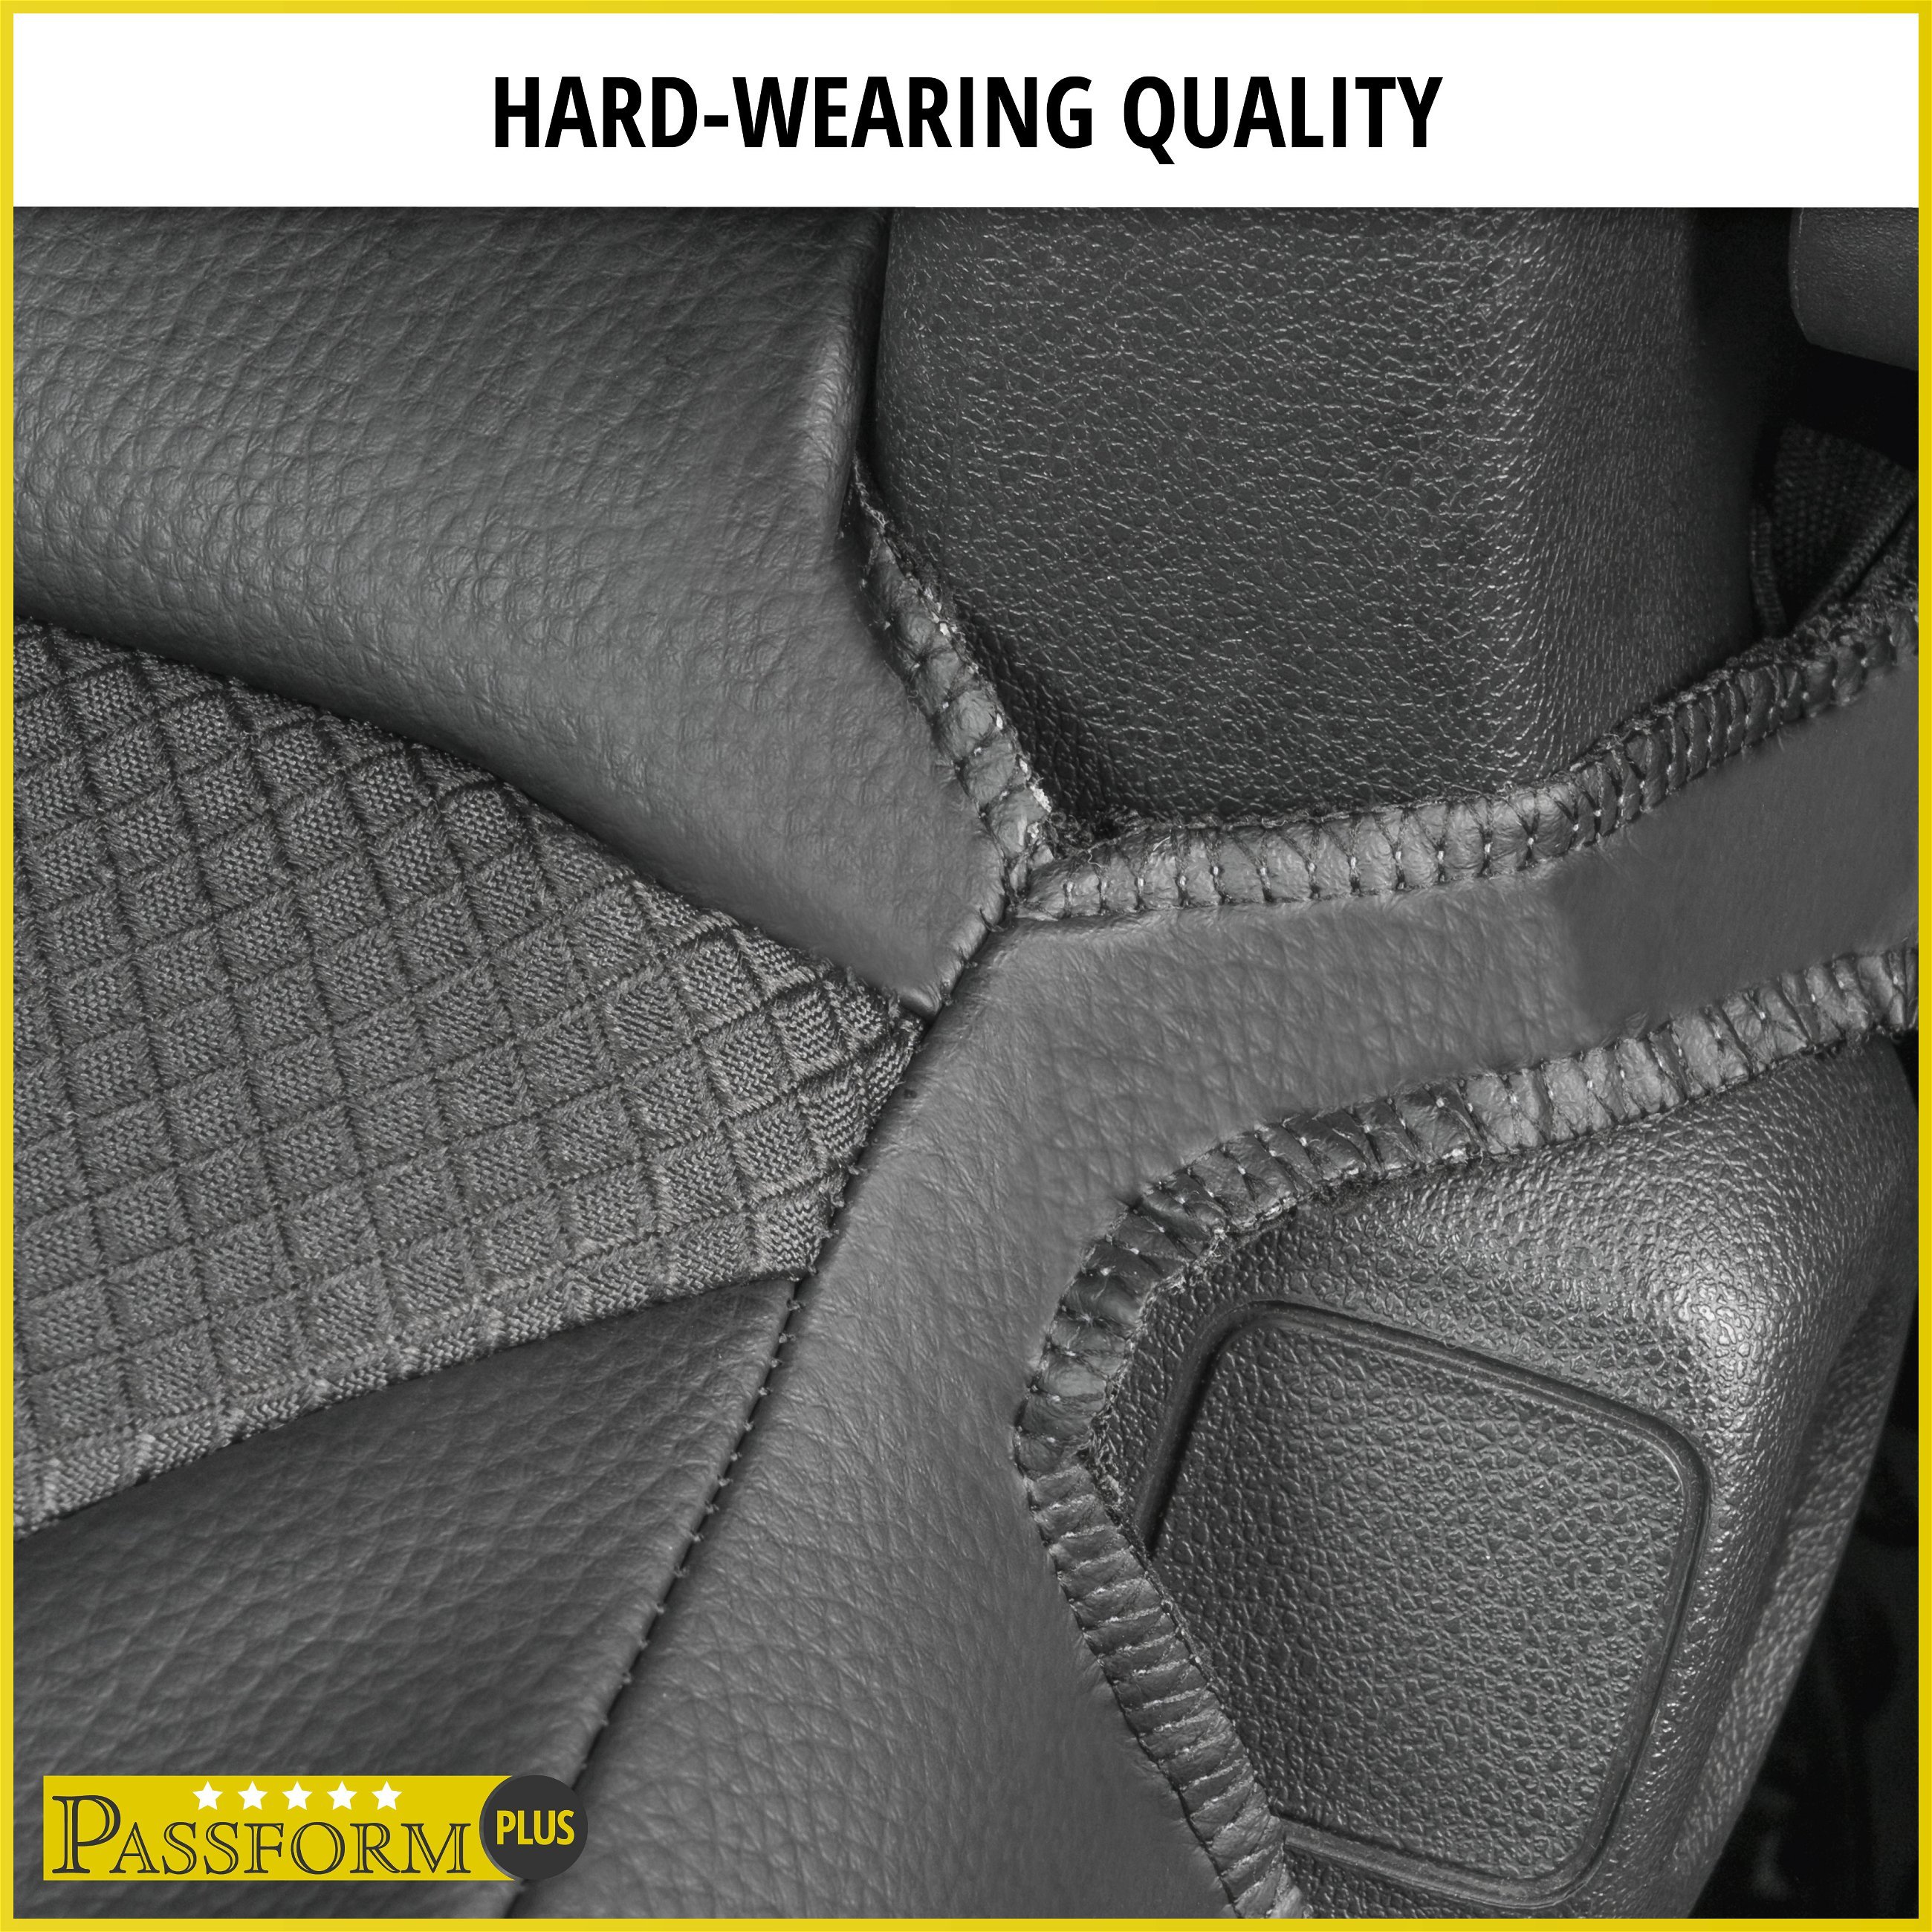 Premium Seat Cover for Fiat Ducato 07/2006-Today, 1 single seat cover front + armrest cover, 1 double bench cover